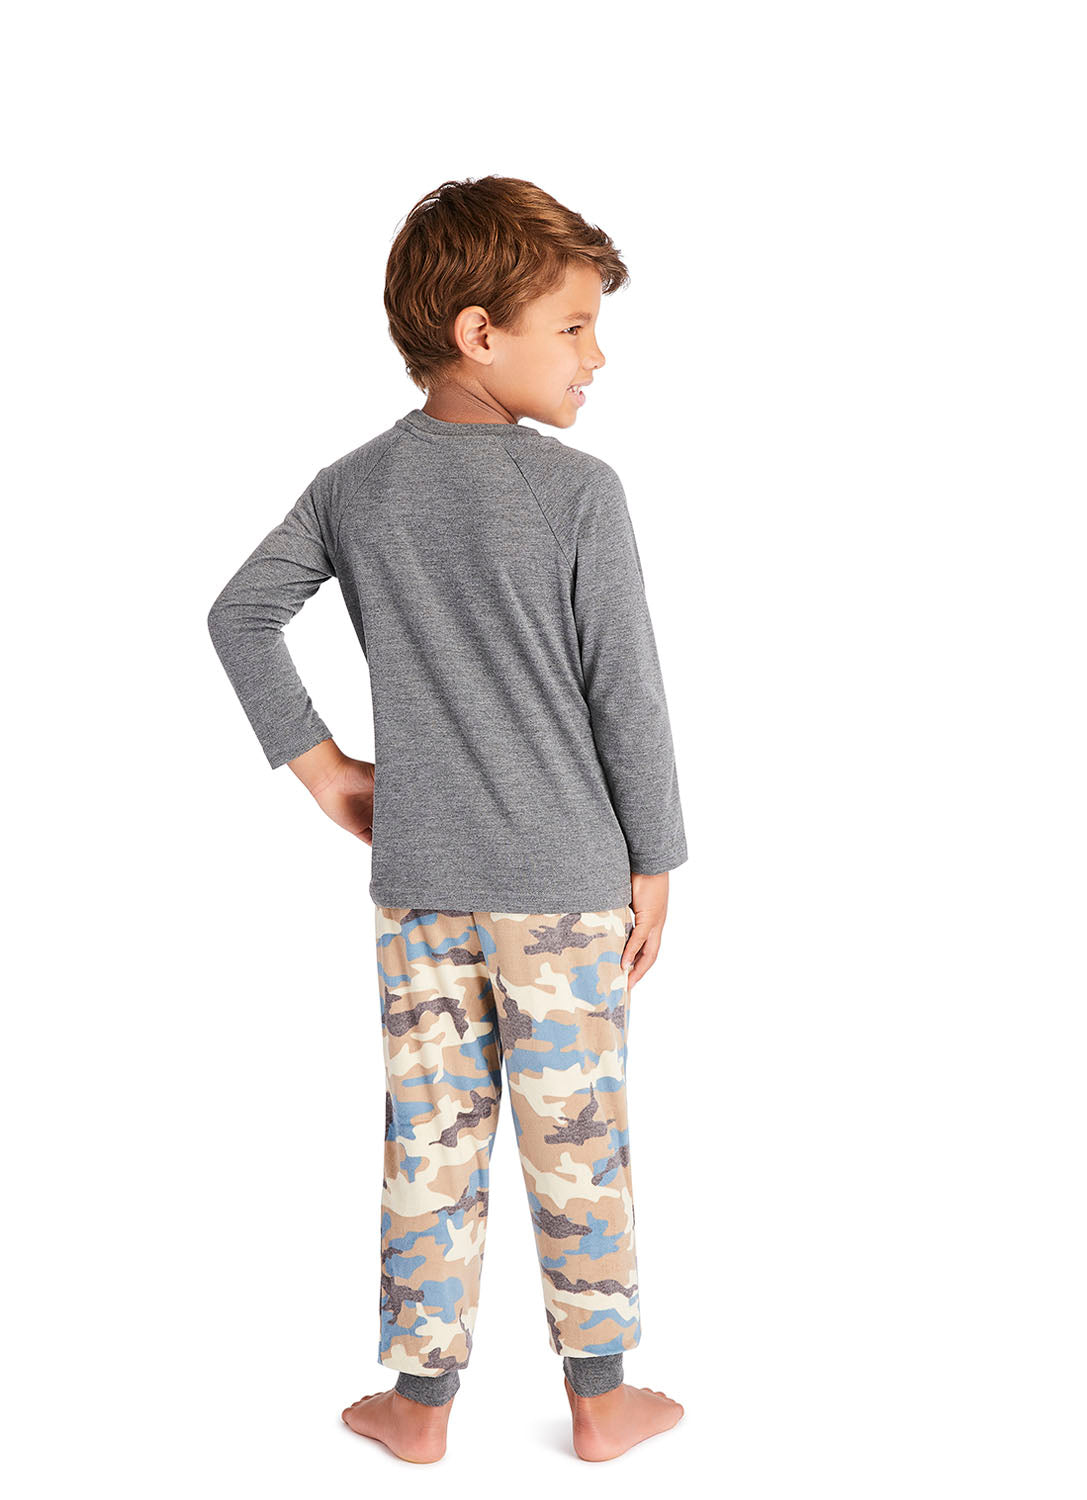 Back view Kid wearing Dino print Pajama Set in Charcoal colour